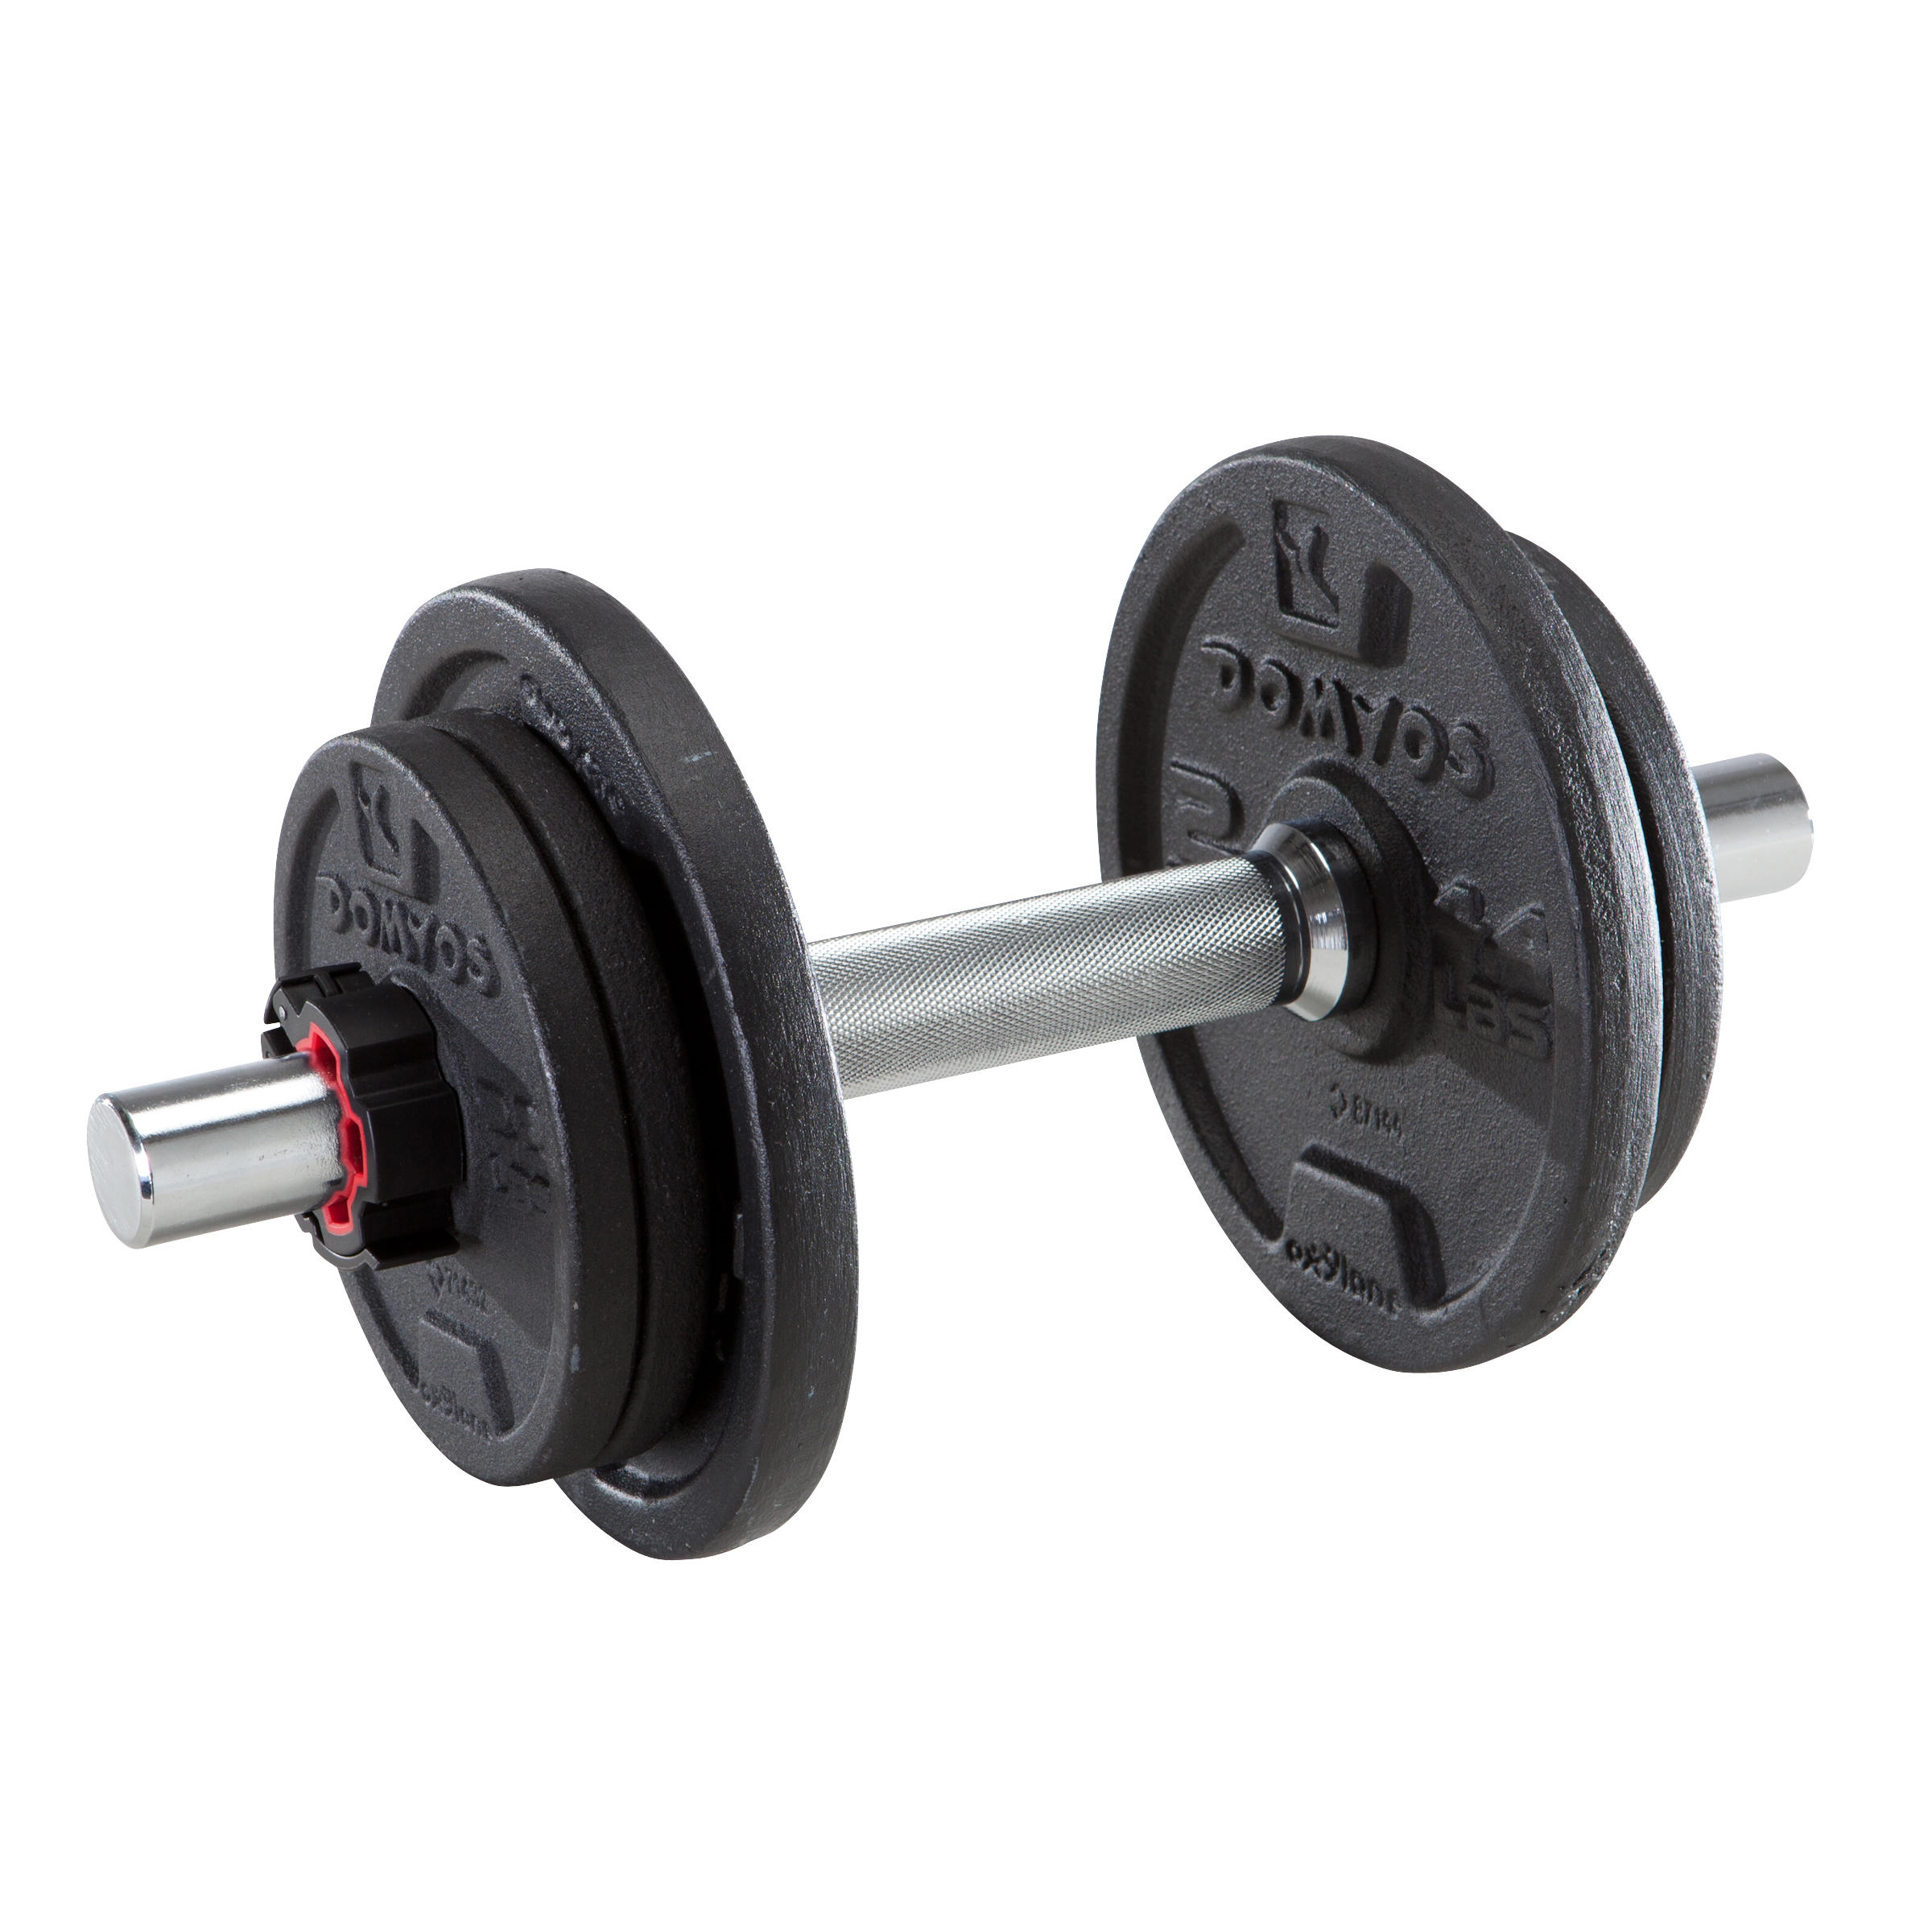 10 kg (22 lbs) Weight Training Dumbbell Kit - CORENGTH